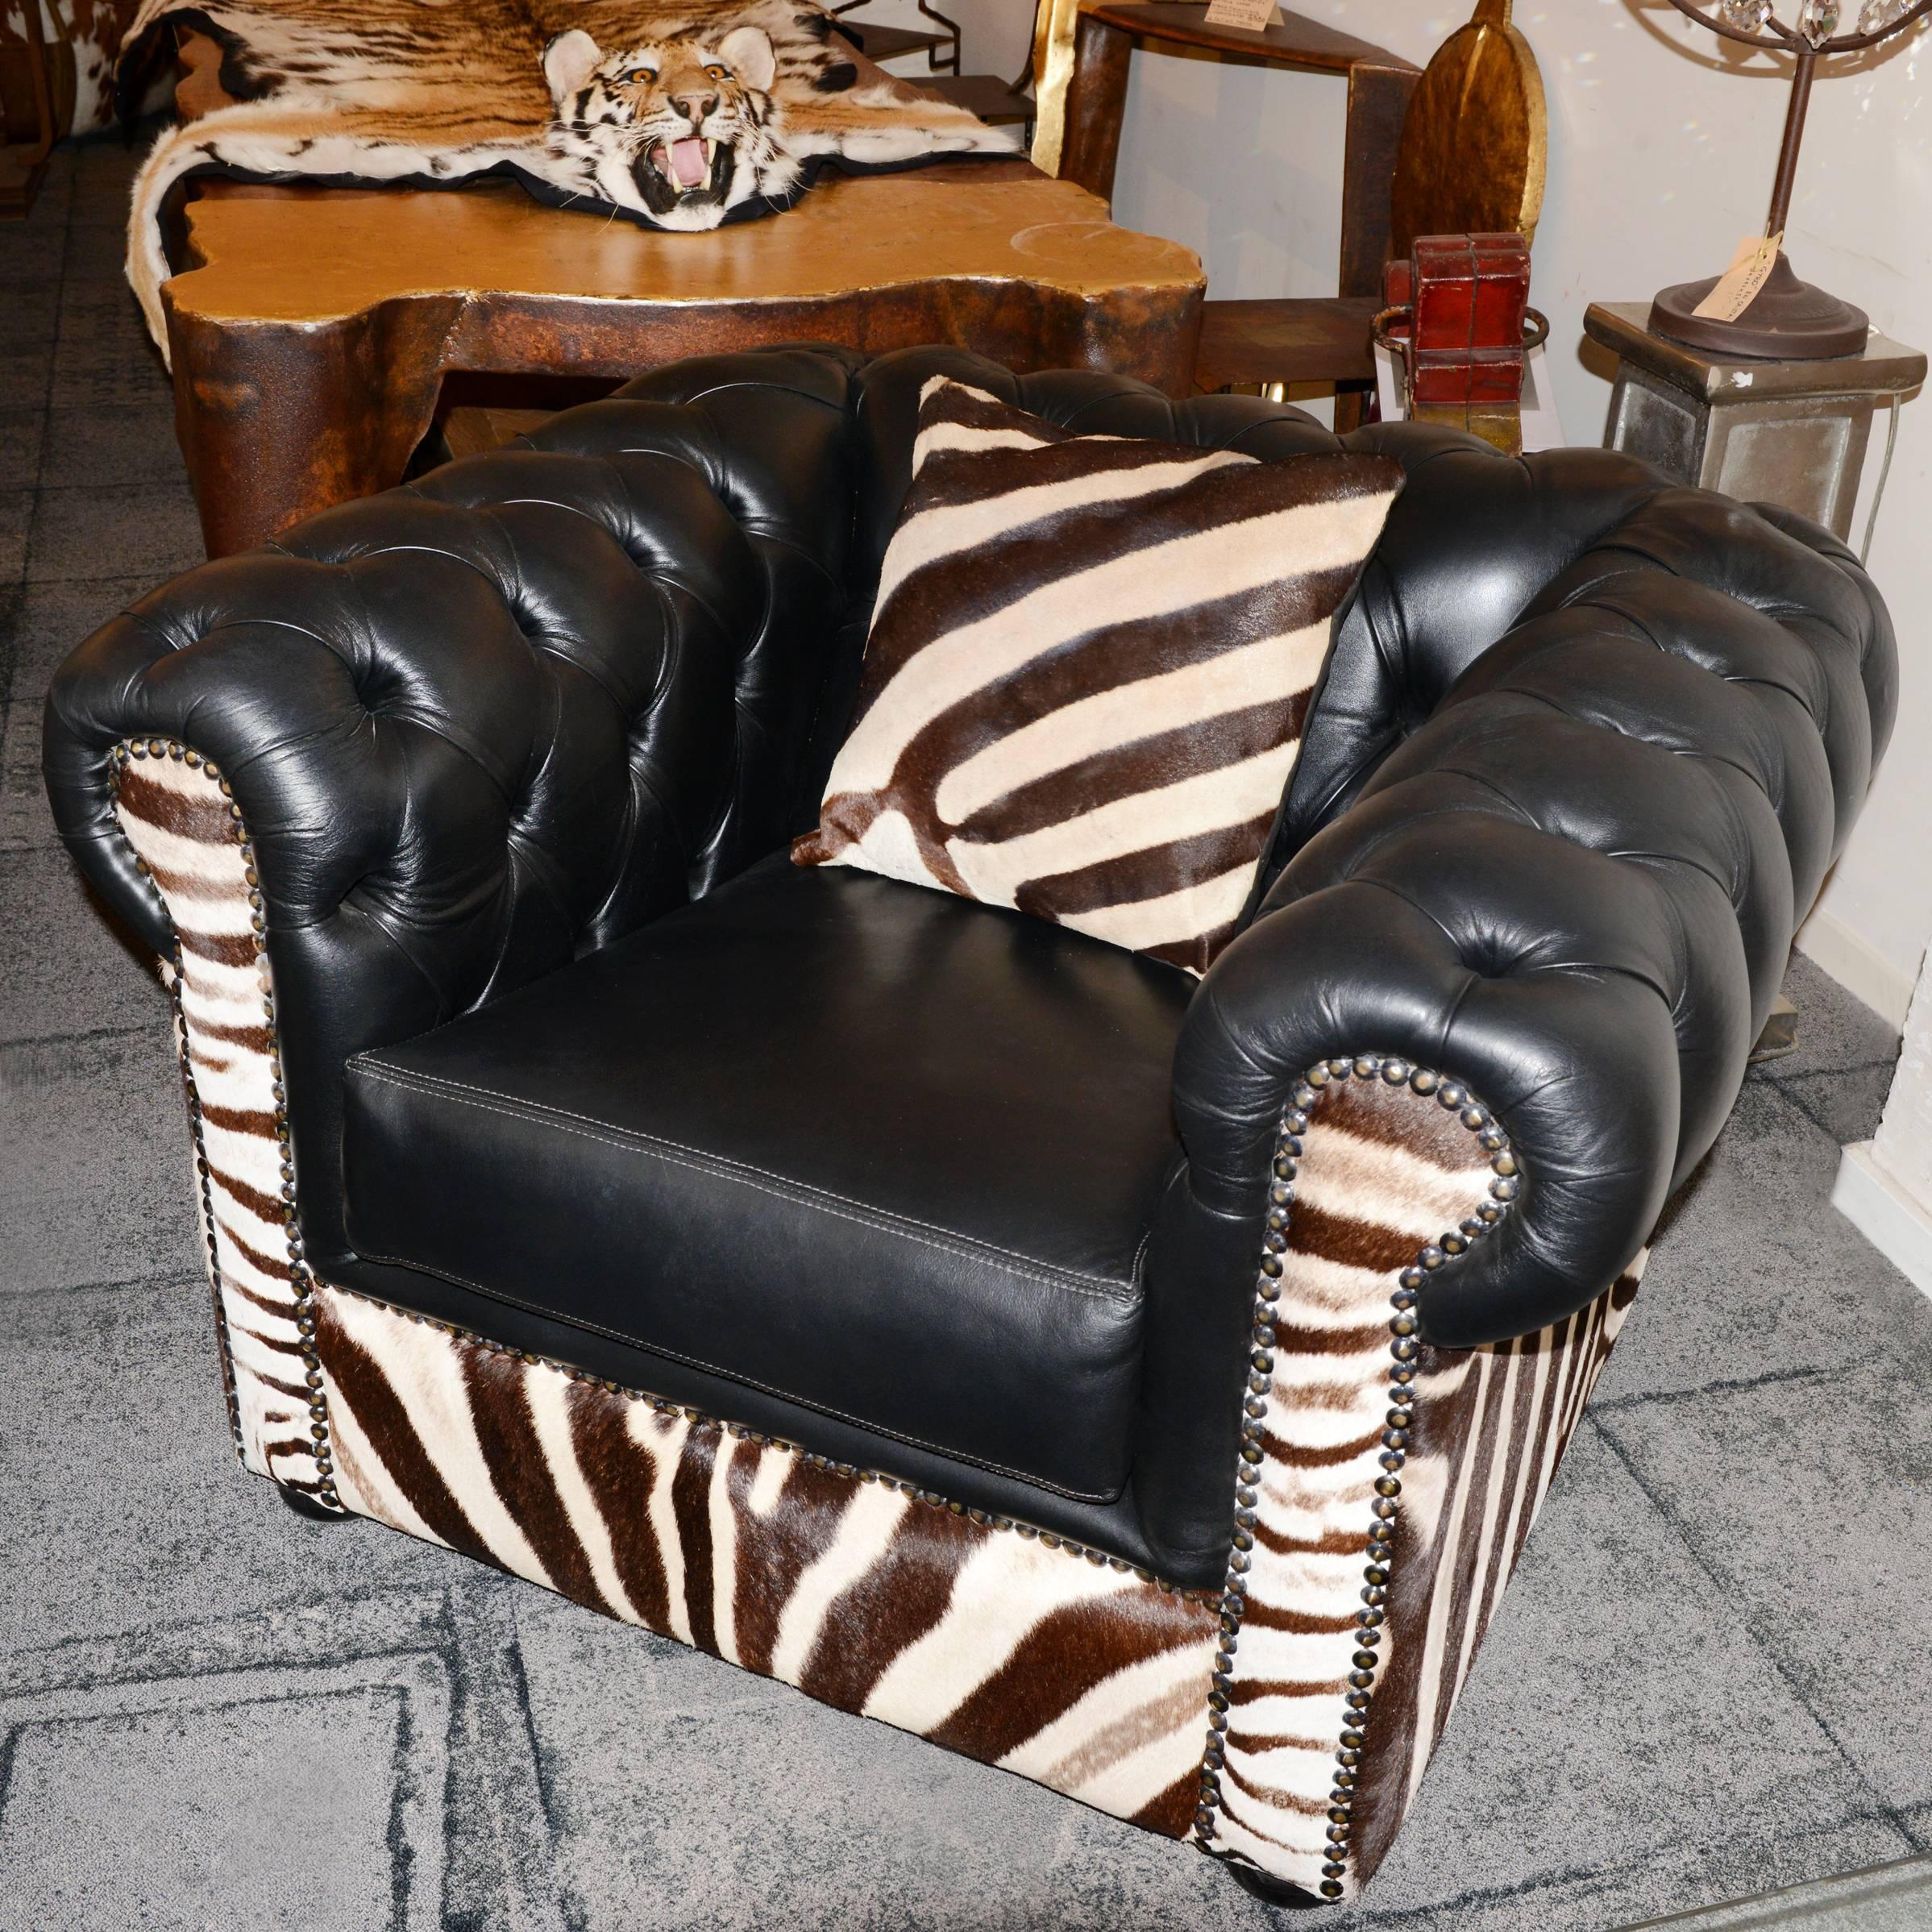 Armchair Zebra with real south Africa zebra skin,
handcrafted work with black genuine leather.
Cushion included, in real zebra skin,
L 38 x 39 cm (price: 440,00€).
Exceptional piece made in France.
